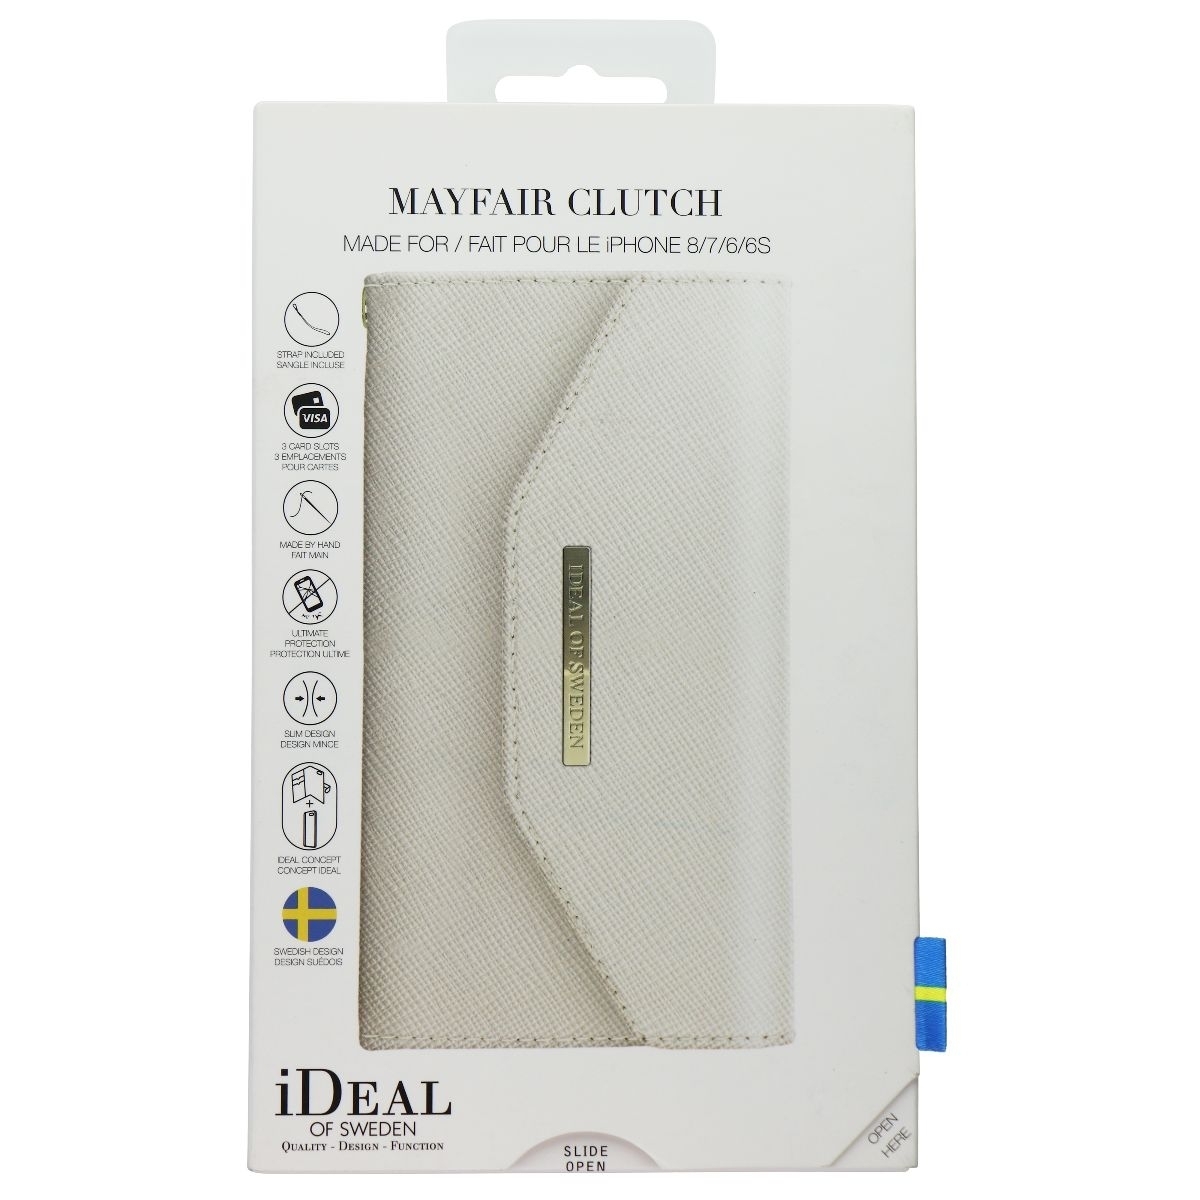 IDeal Of Sweden Mayfair Clutch Wallet Case For Apple IPhone 8/7/6s/6 - White (Refurbished)